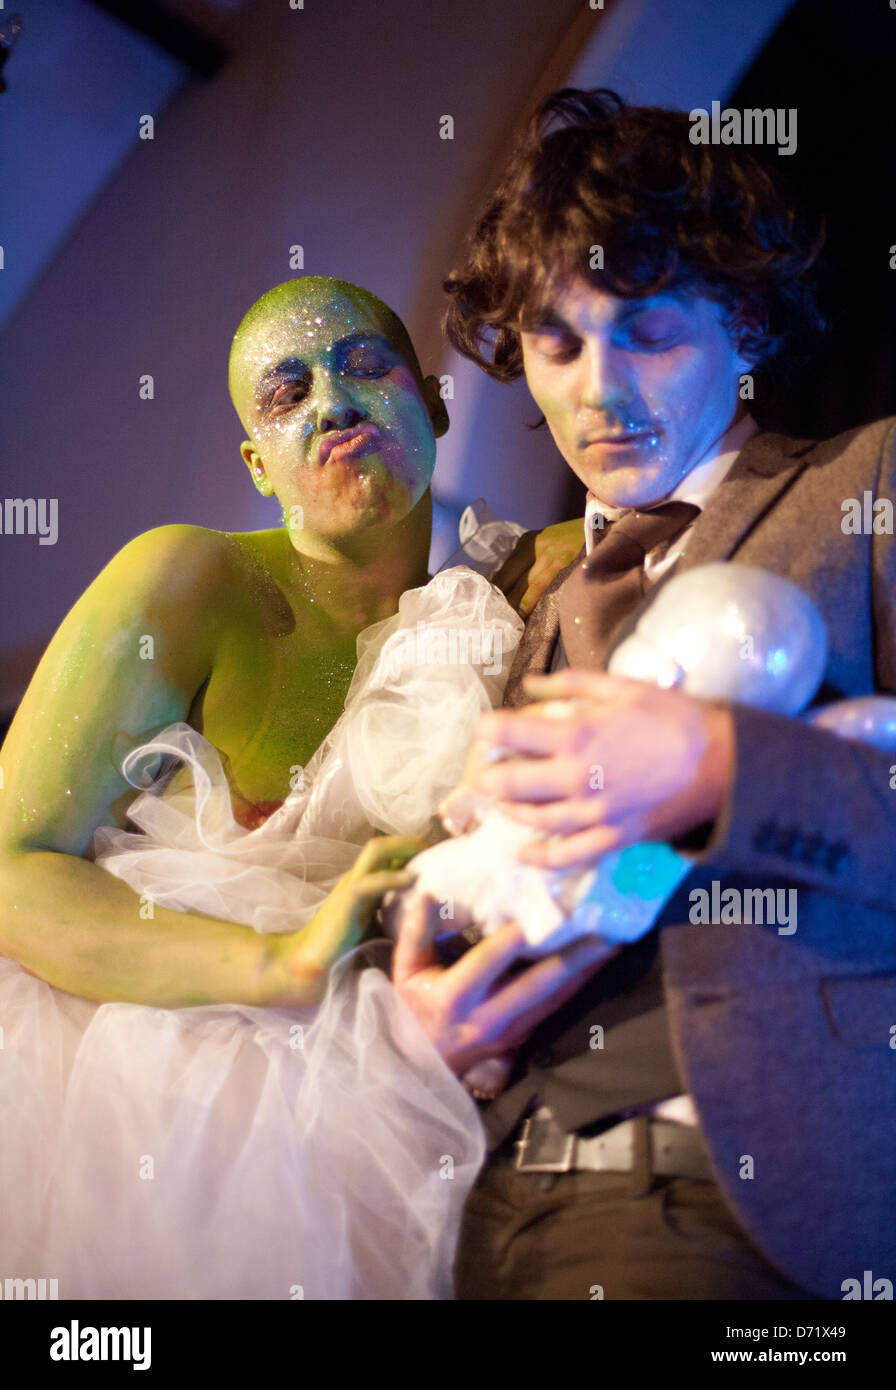 Two actors performing a comedy sketch of a man and a green alien woman at a Dr Sketchy's Burlesque life drawing event Stock Photo